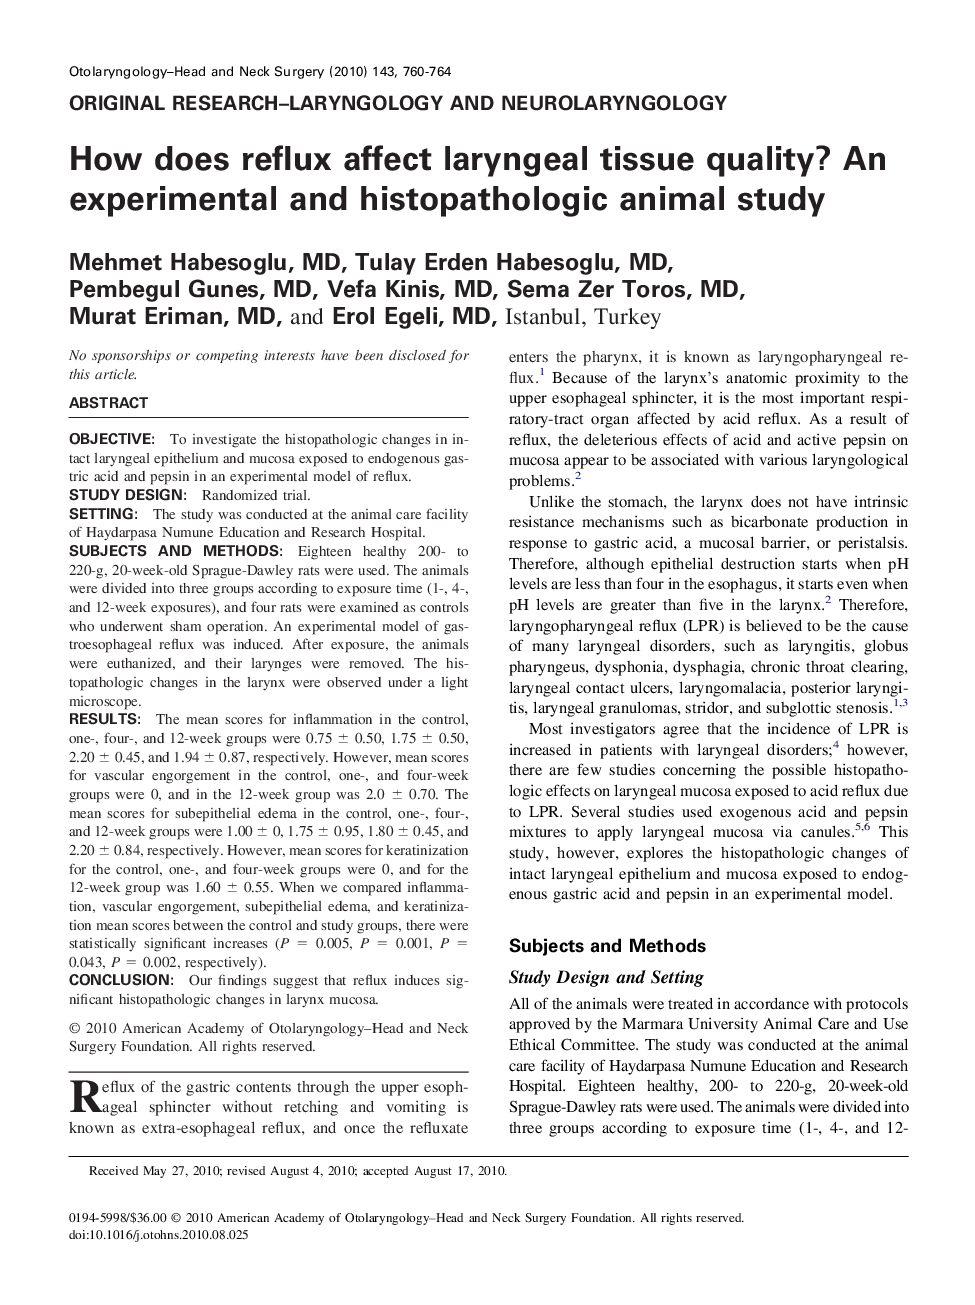 How does reflux affect laryngeal tissue quality? An experimental and histopathologic animal study